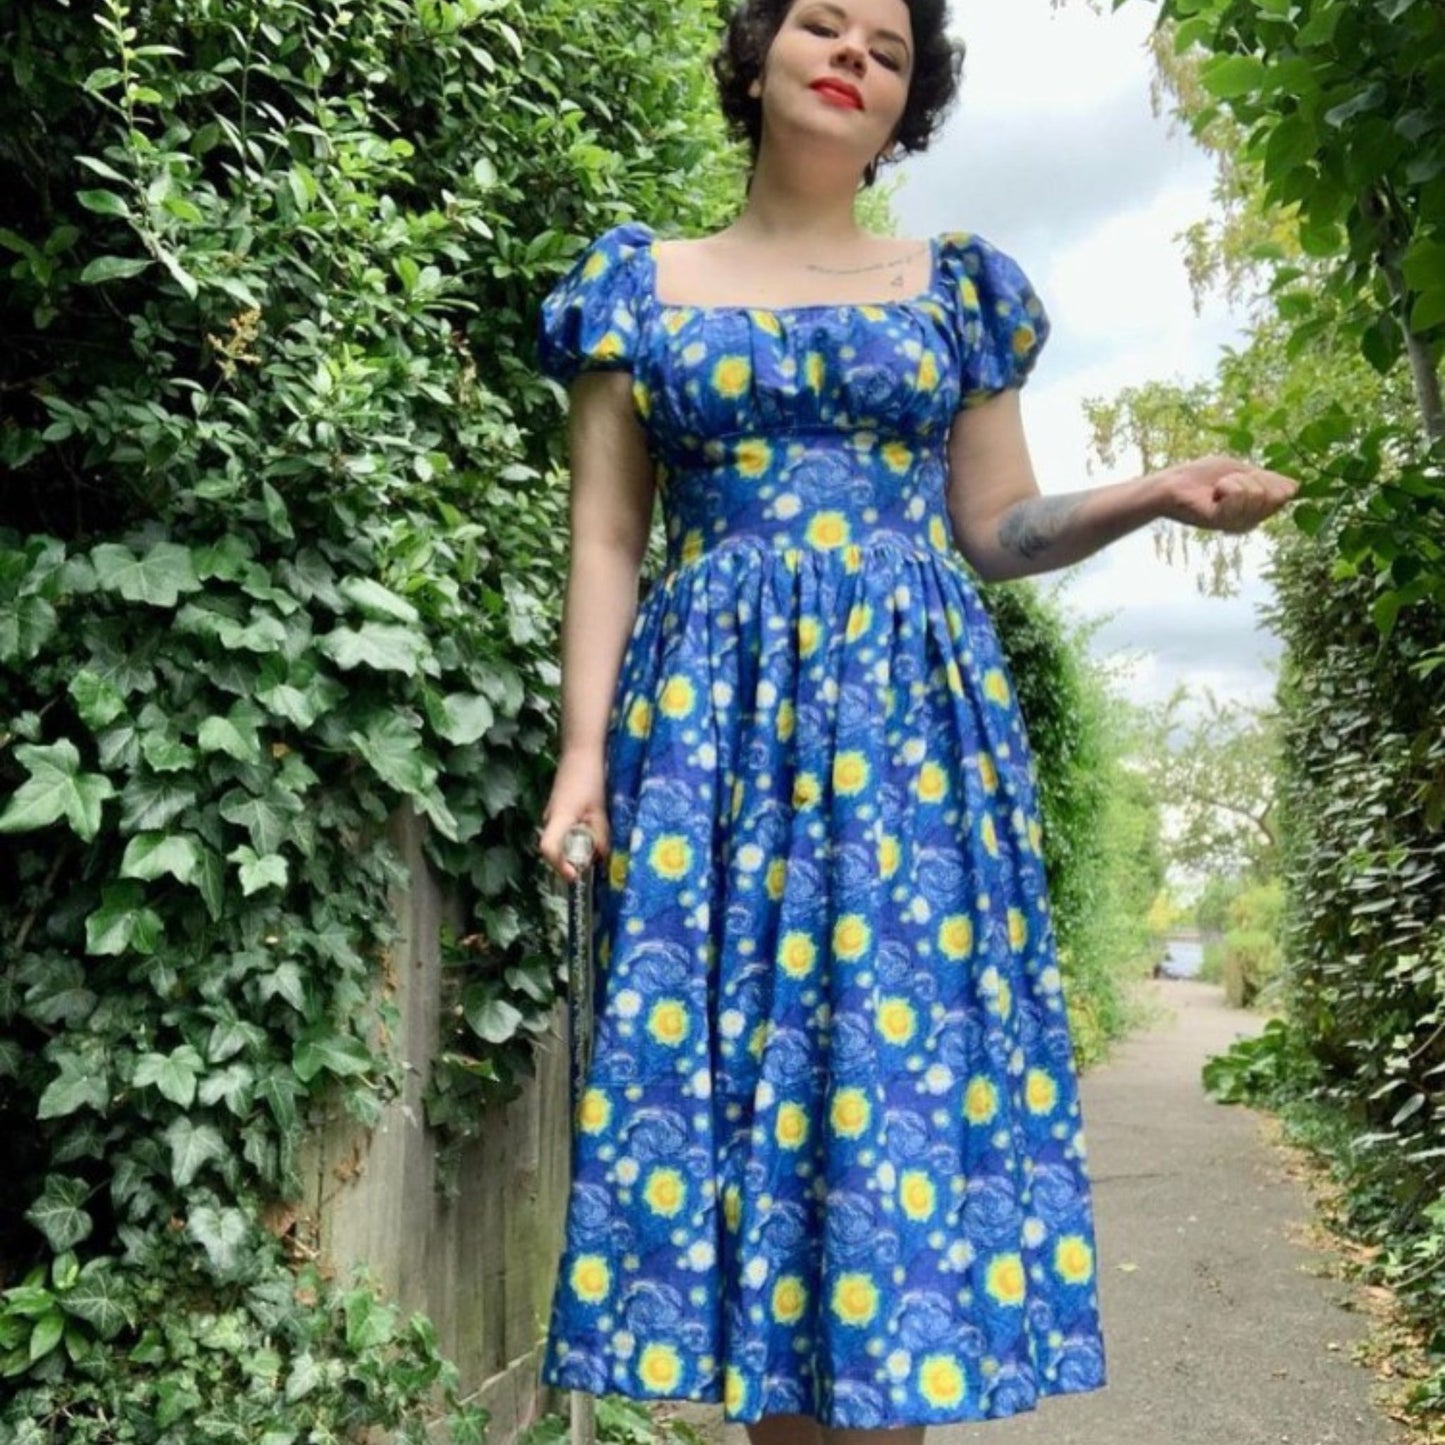 Model wearing 1950s one-piece dress made from Simplicity 4638 pattern